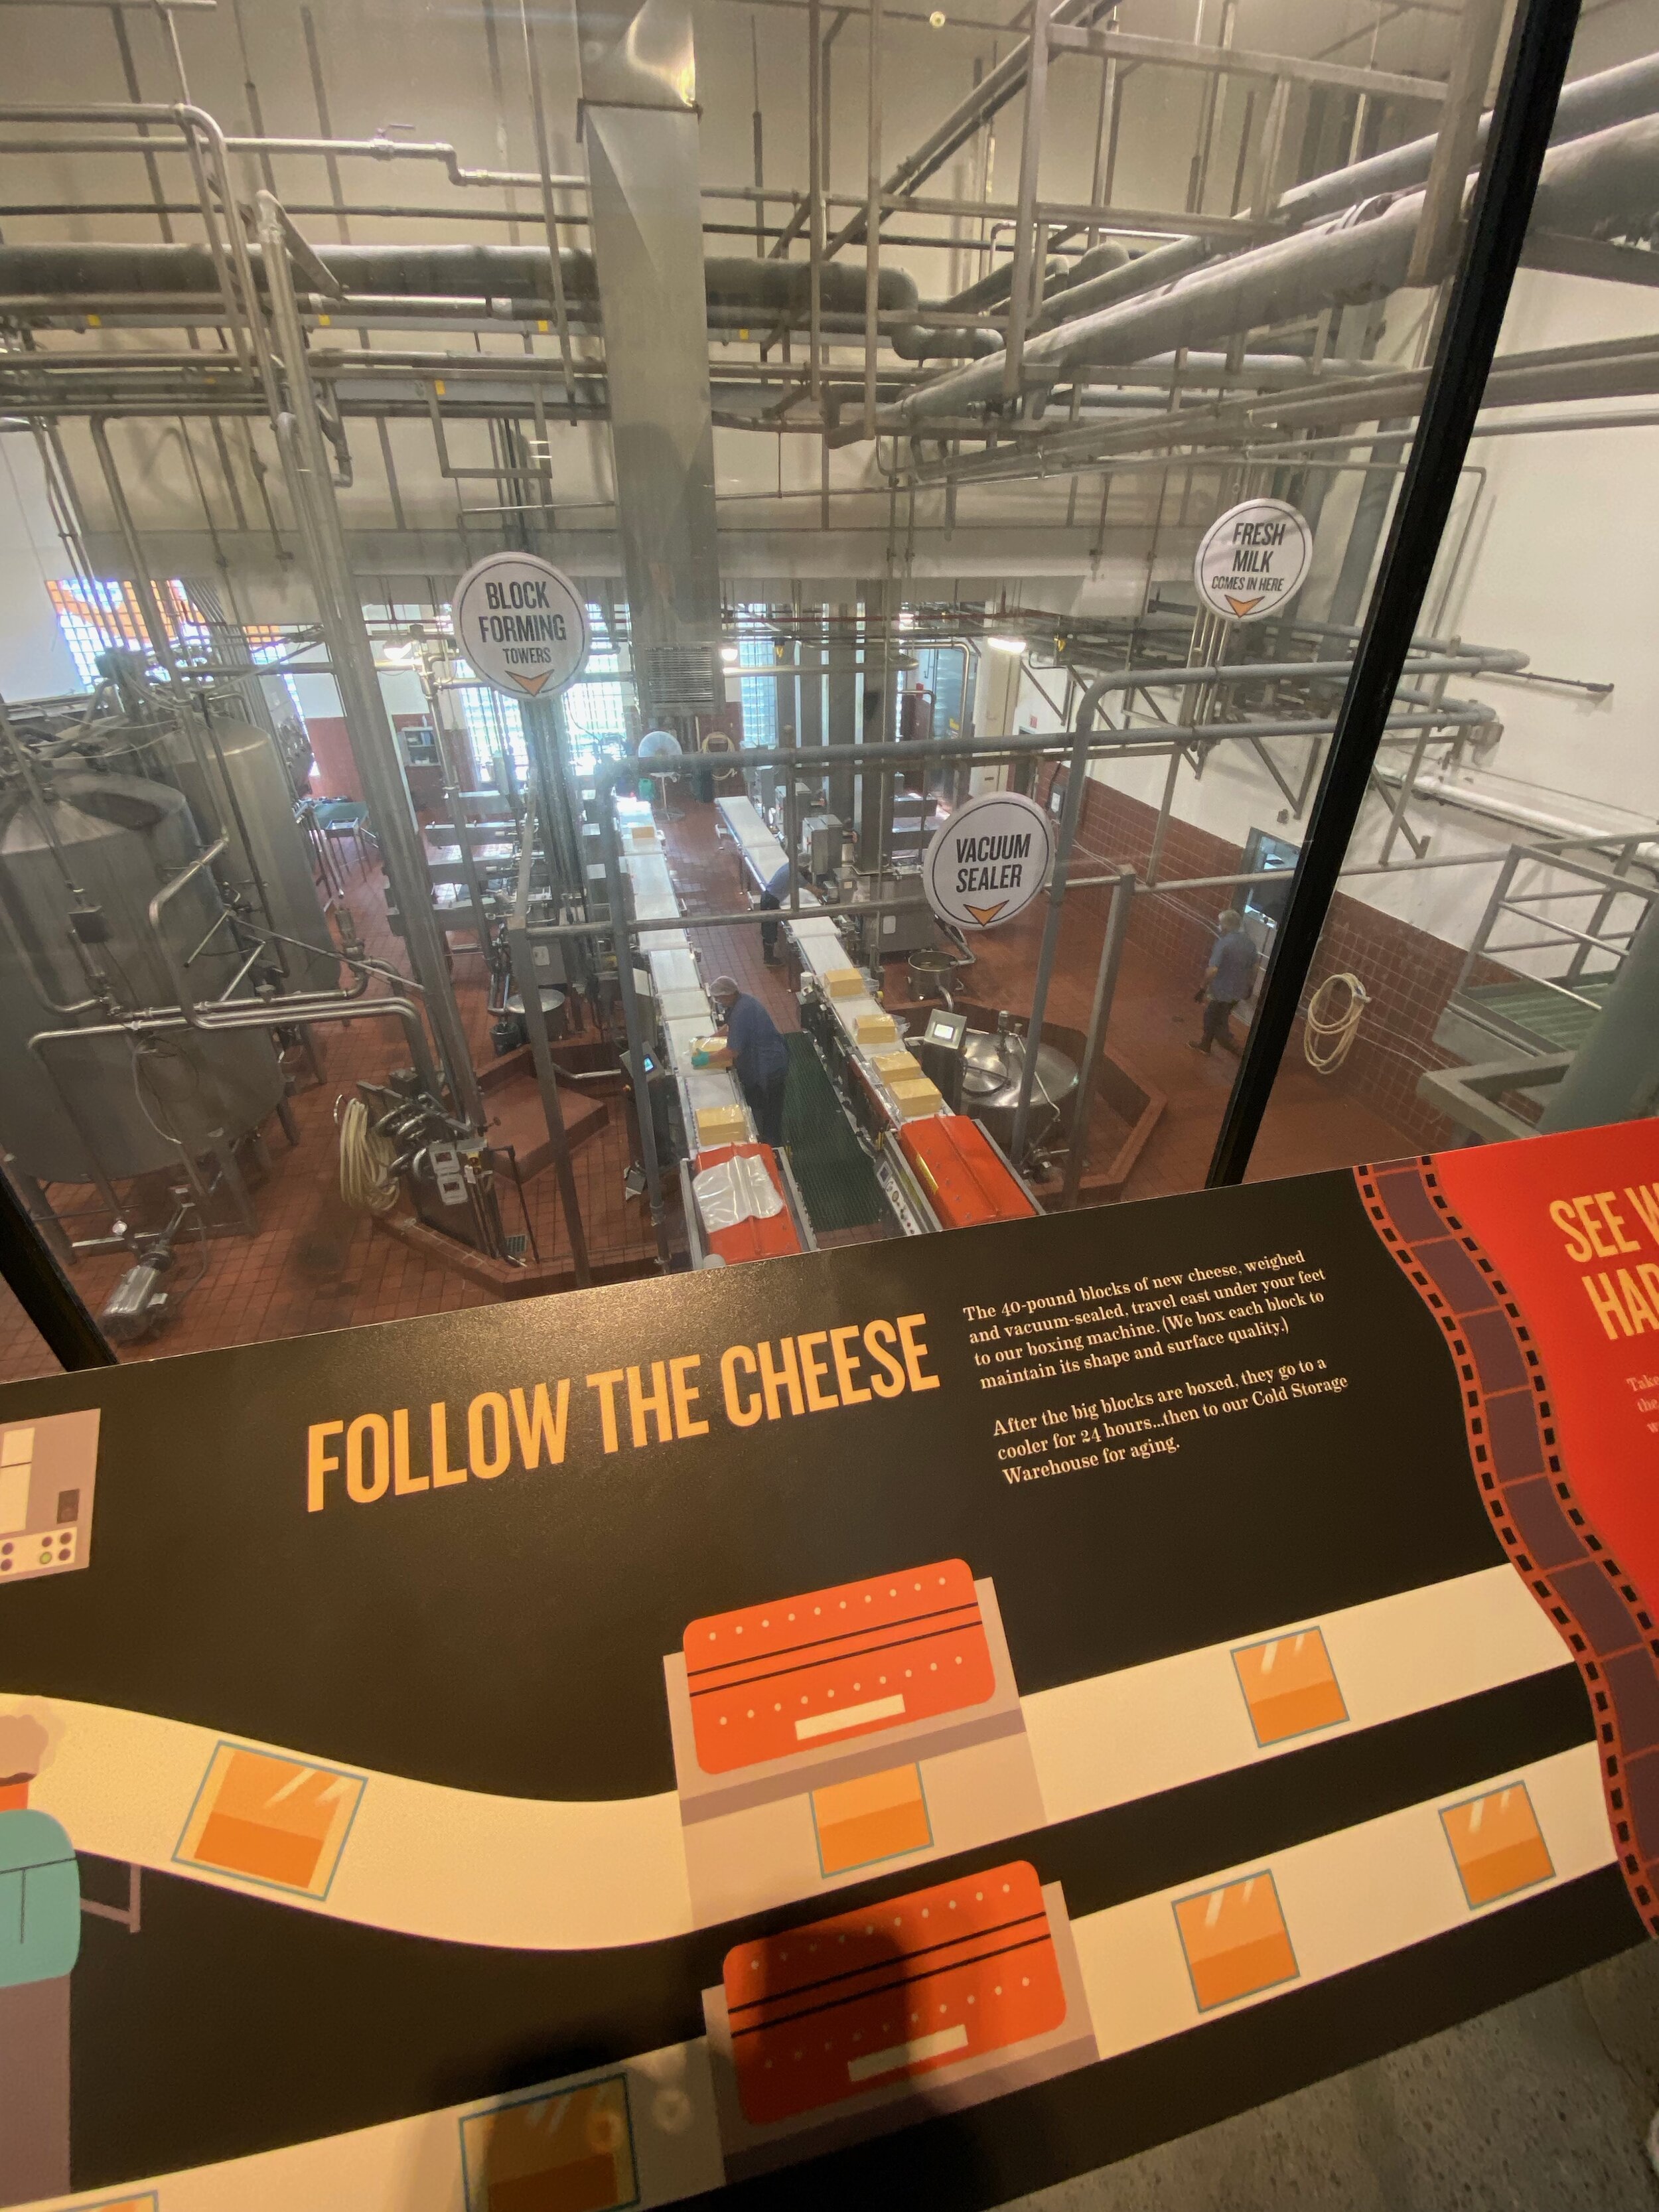 Informative signs at every window show you what you are looking at as they lead the way through the entire cheese-making process.  Photo by Karen Boudreaux, June 14, 2021